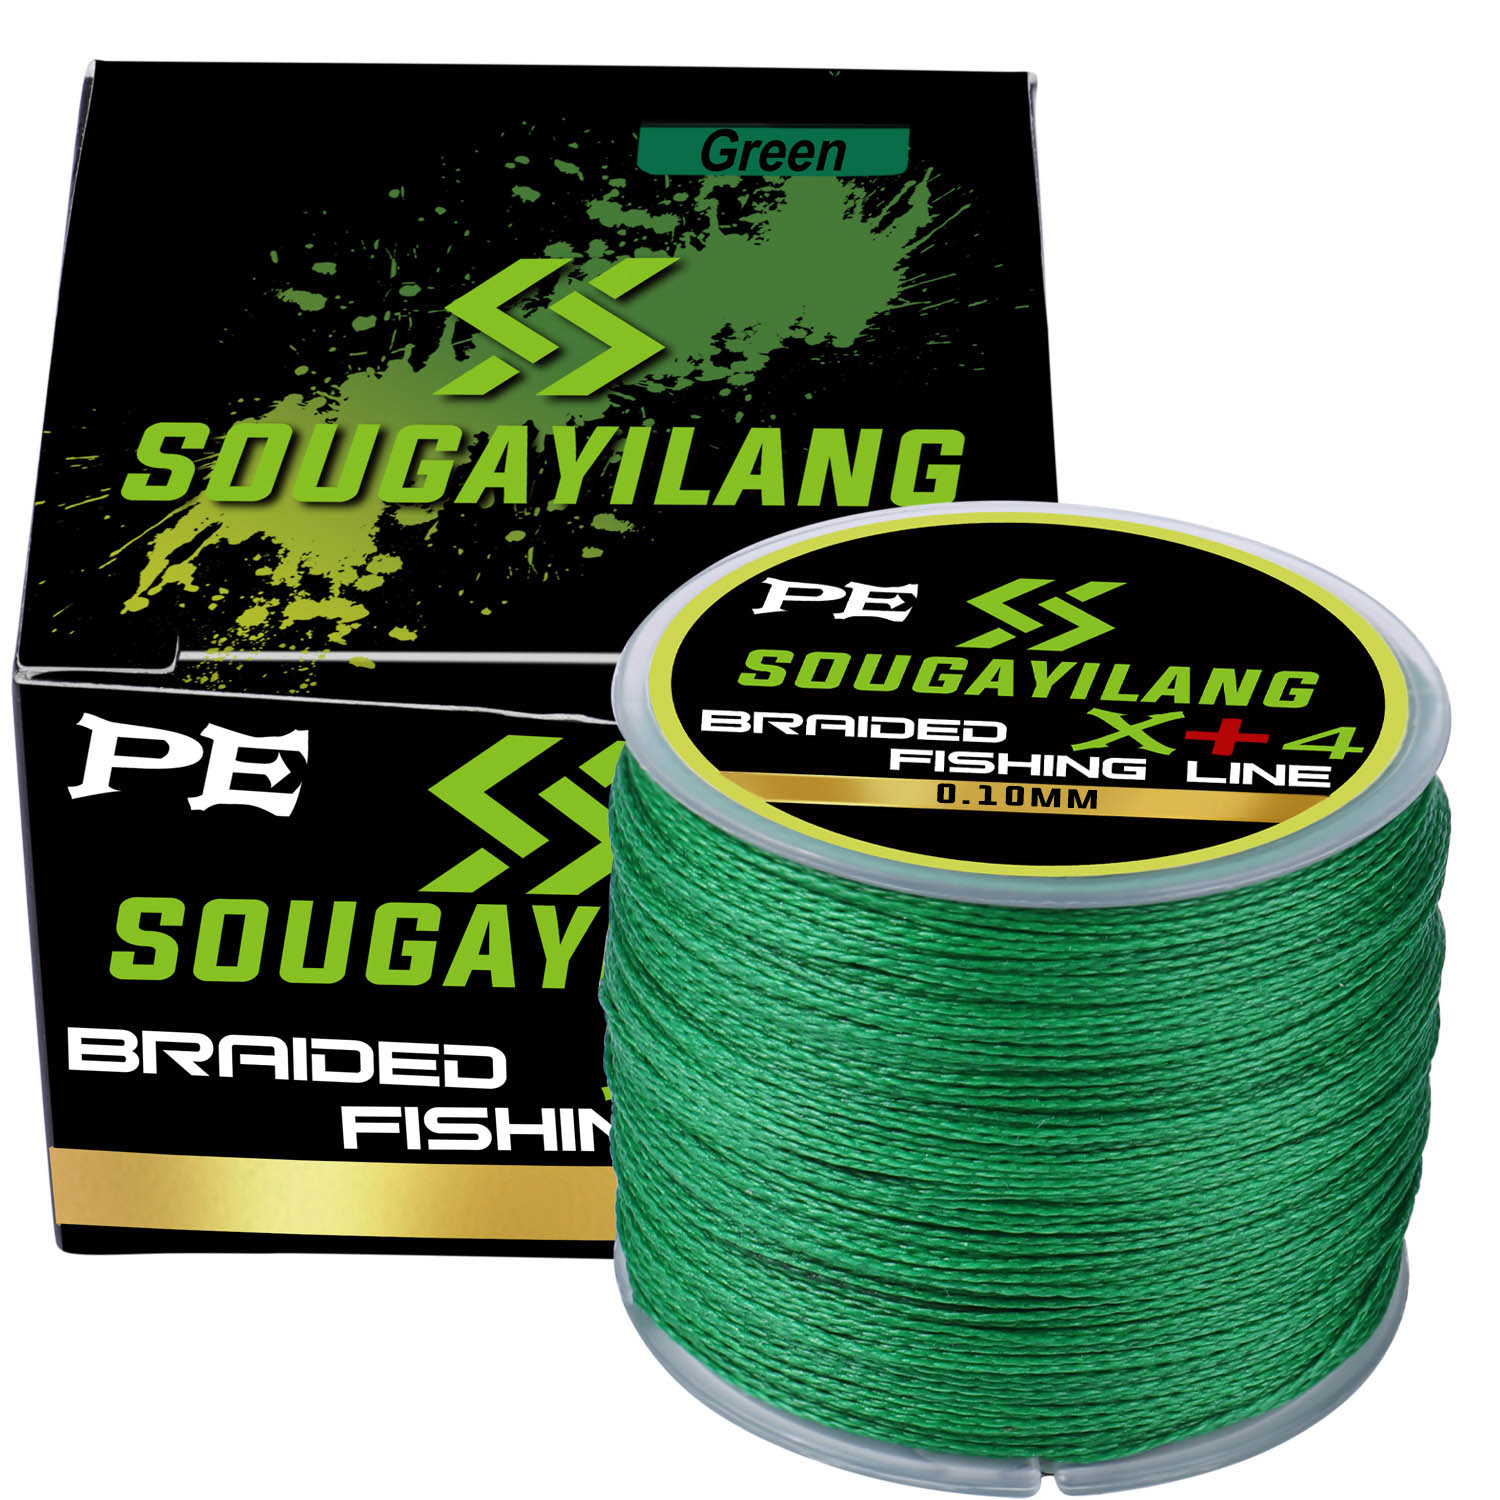 Sougayilang 4 Strands 150m PE Braided Fishing Line 22LB-87.1LB  Multifilament Smooth Fishing Wire for Carp Fishing Tackle